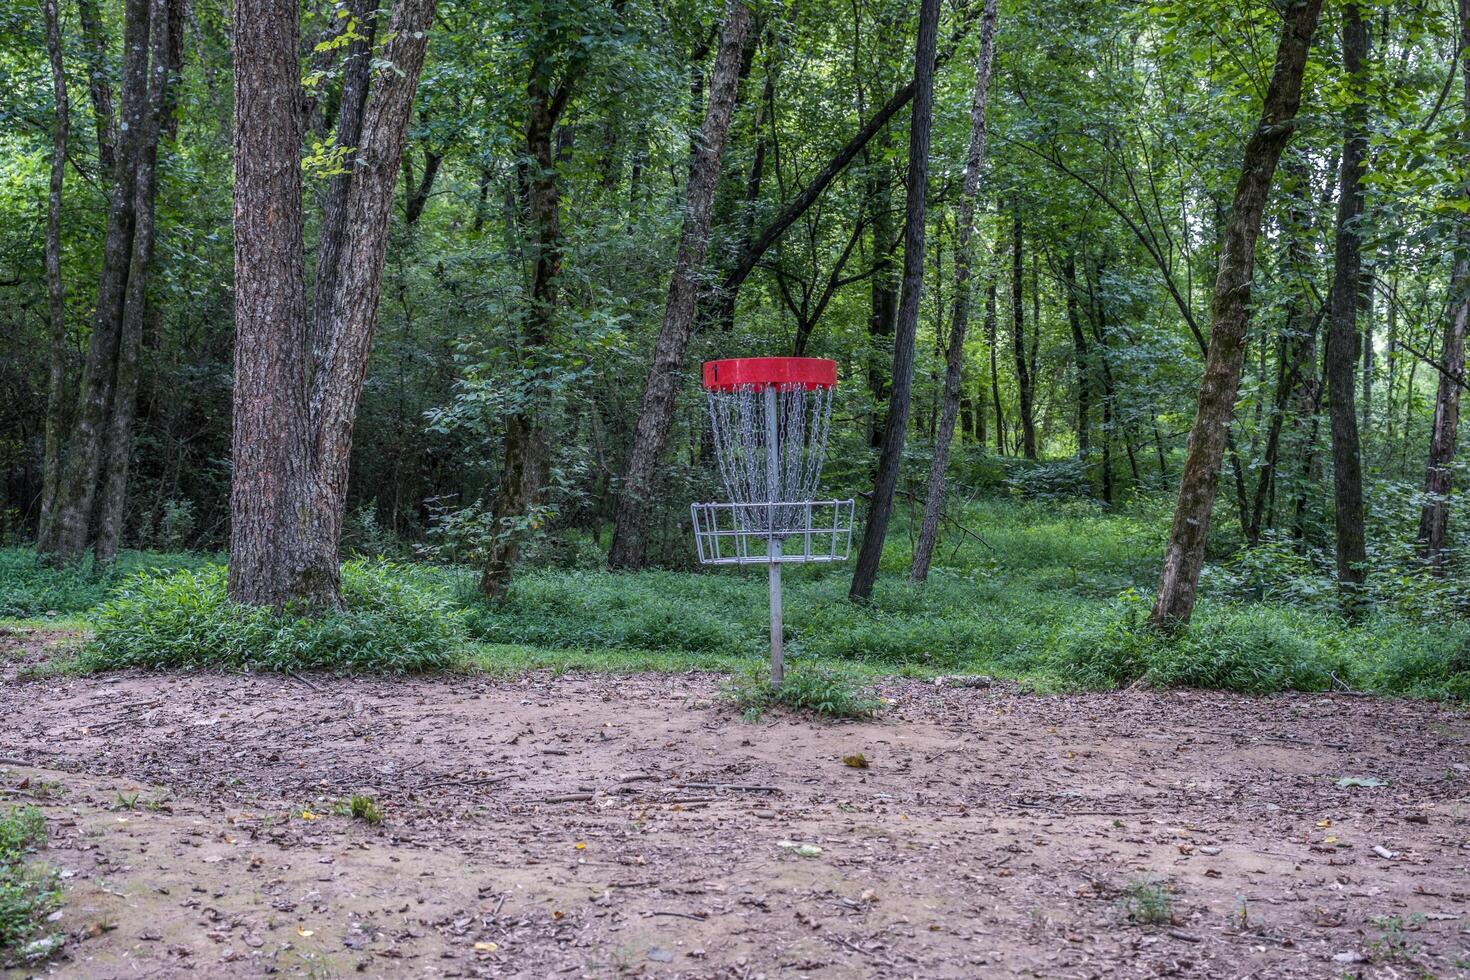 Disc golf basket in the woodlands photo